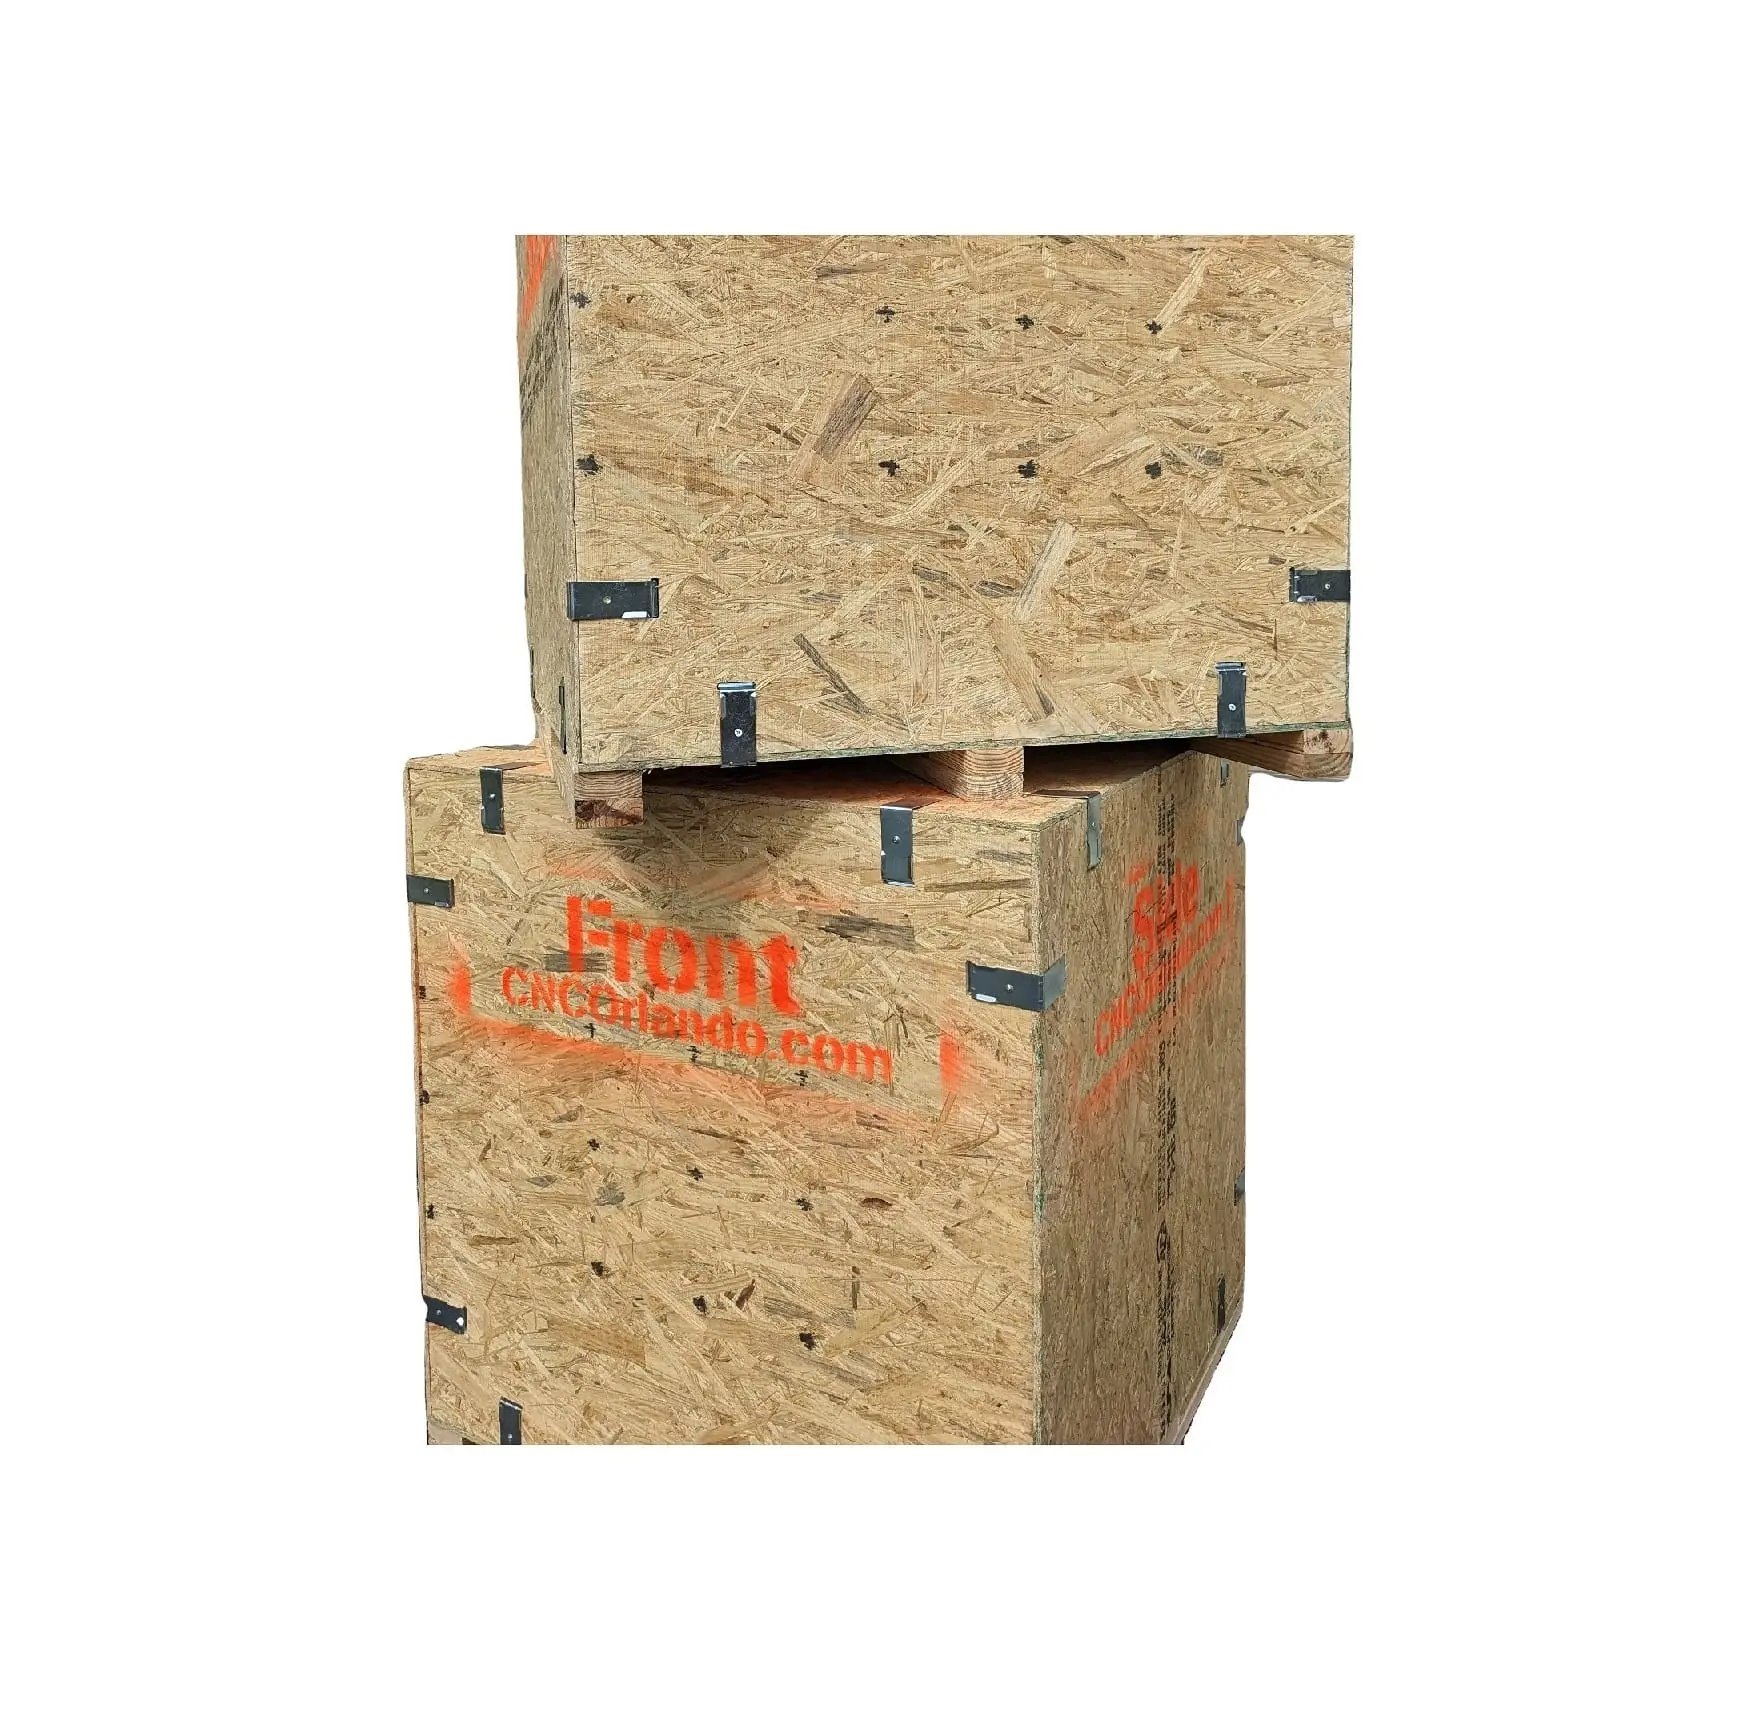 Best Selling Reusable OSB Shipping Crates for Cargo and Logistic Industry Purposes from US Manufacturer at Affordable Prices